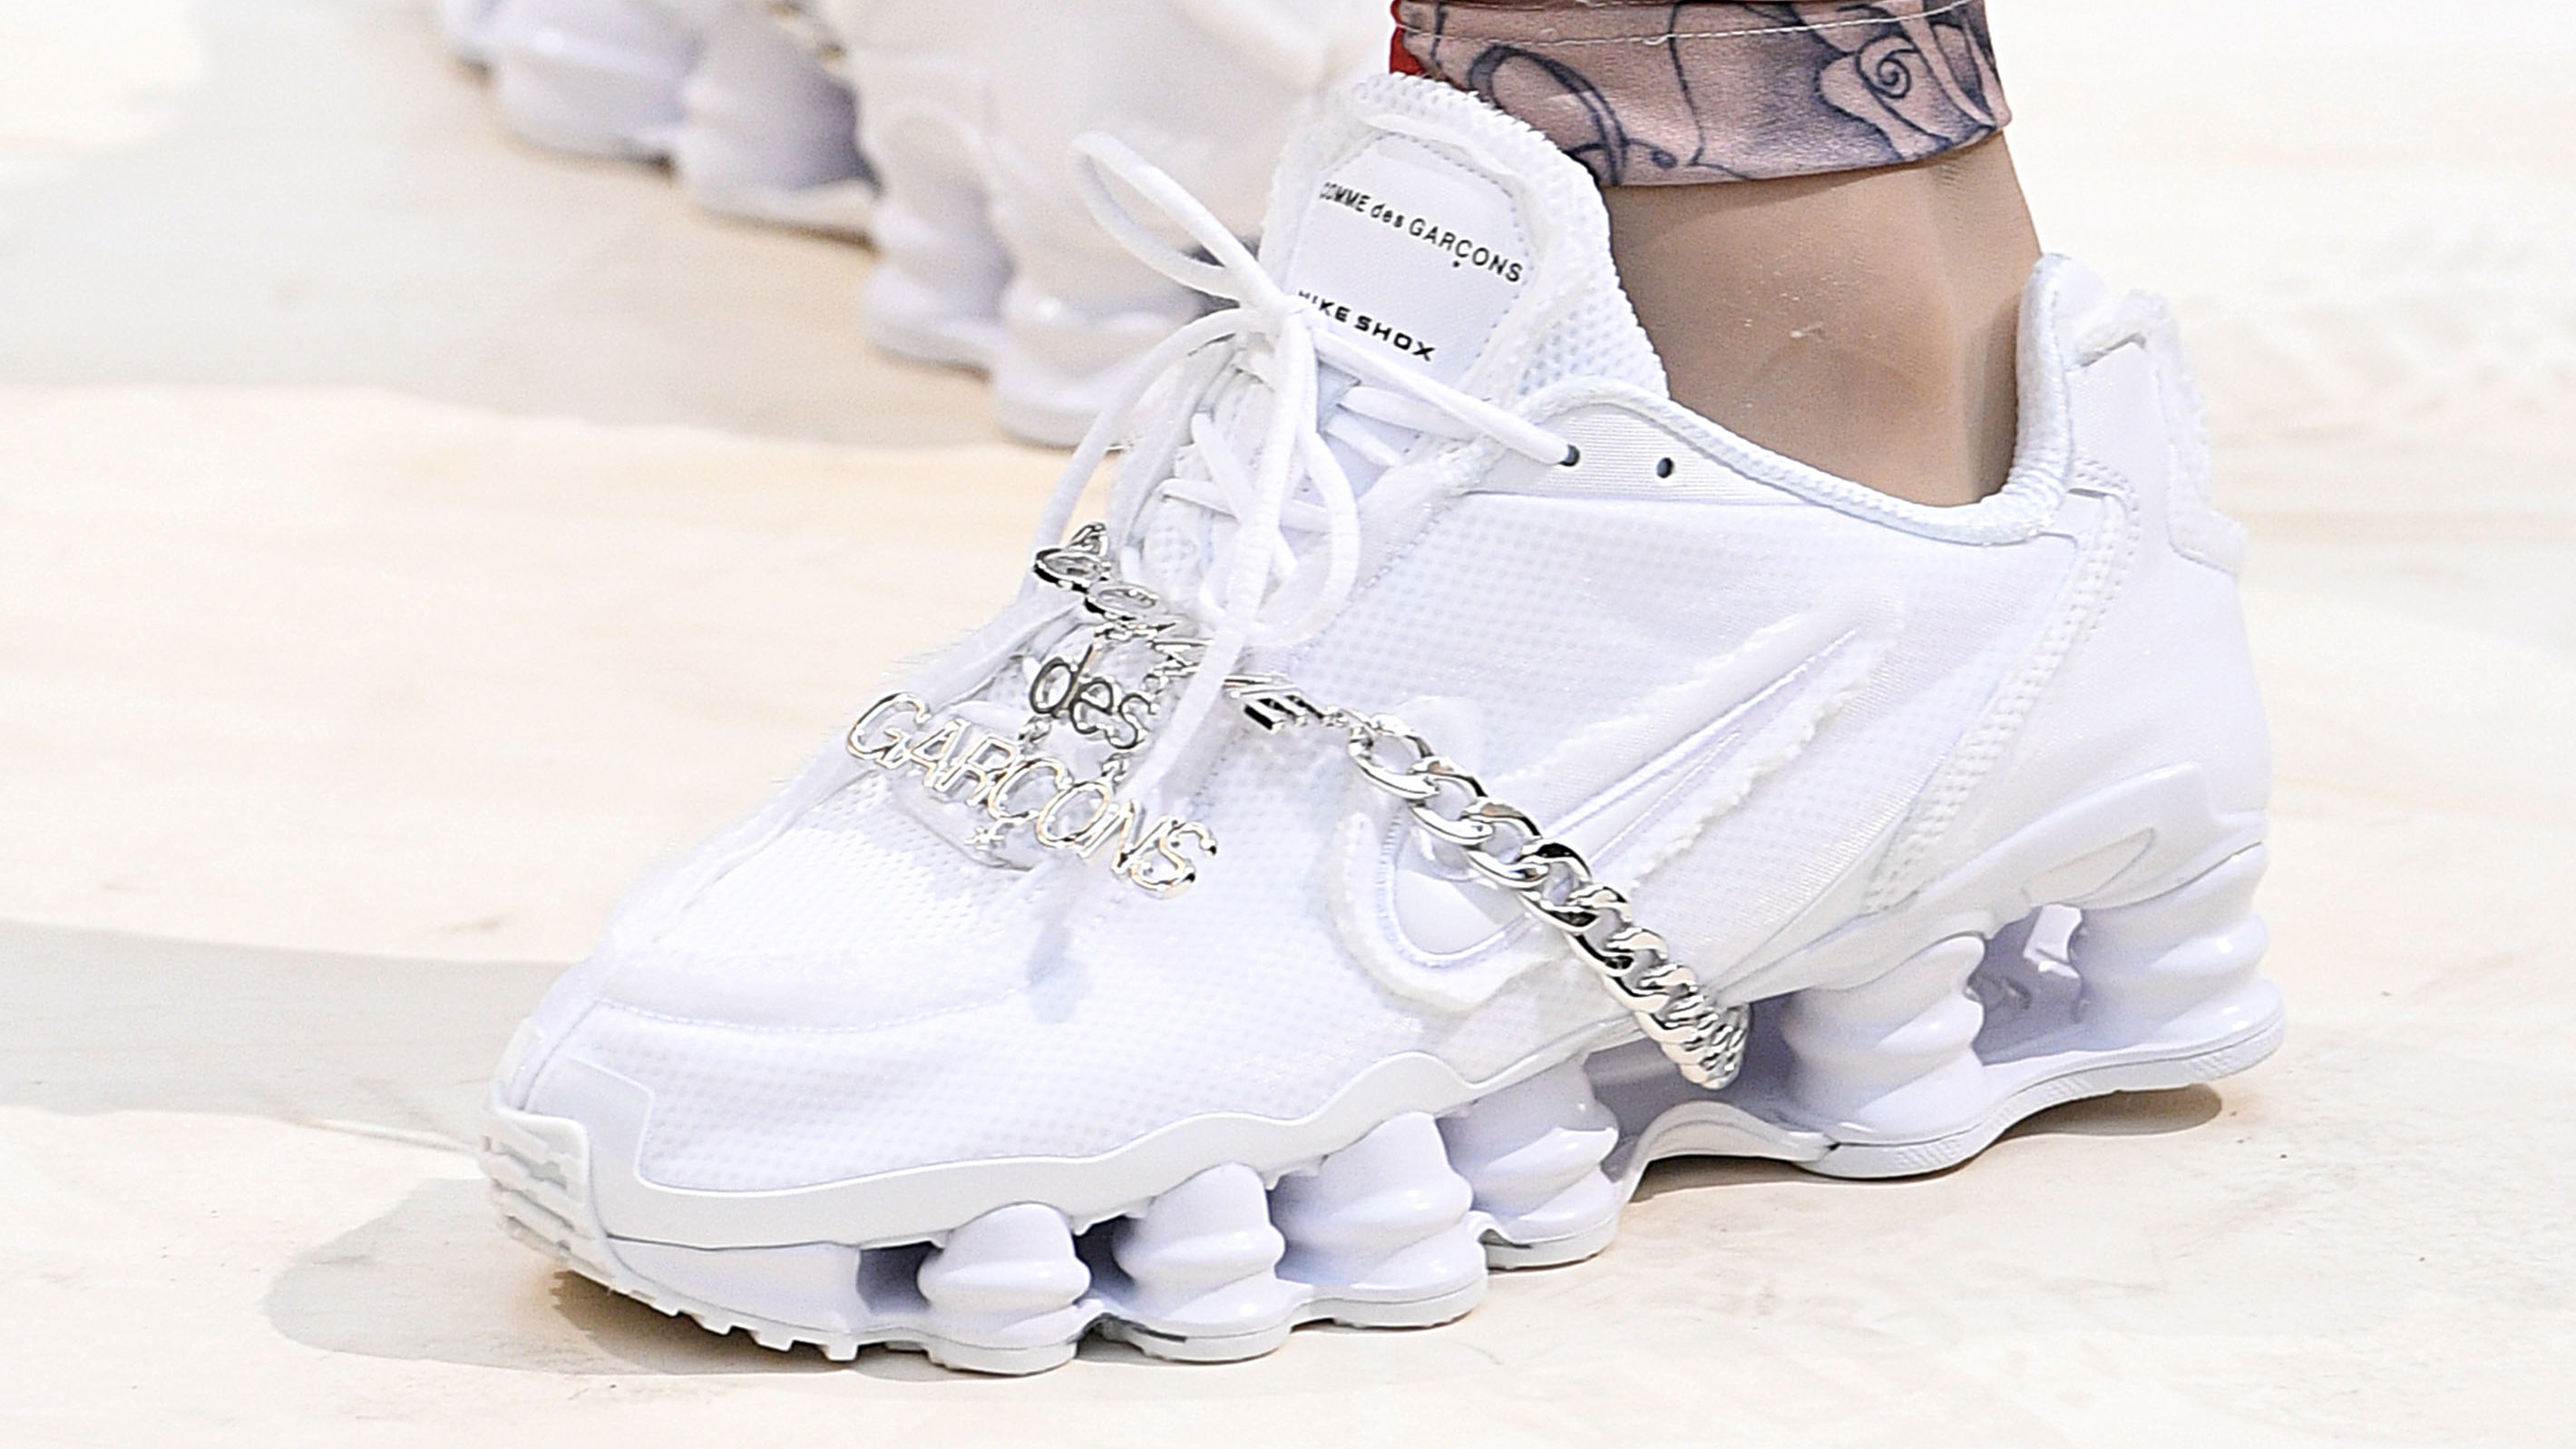 Degree Celsius Contemporary Discovery Comme des Garcons x Nike Shox Release Date | Sole Collector